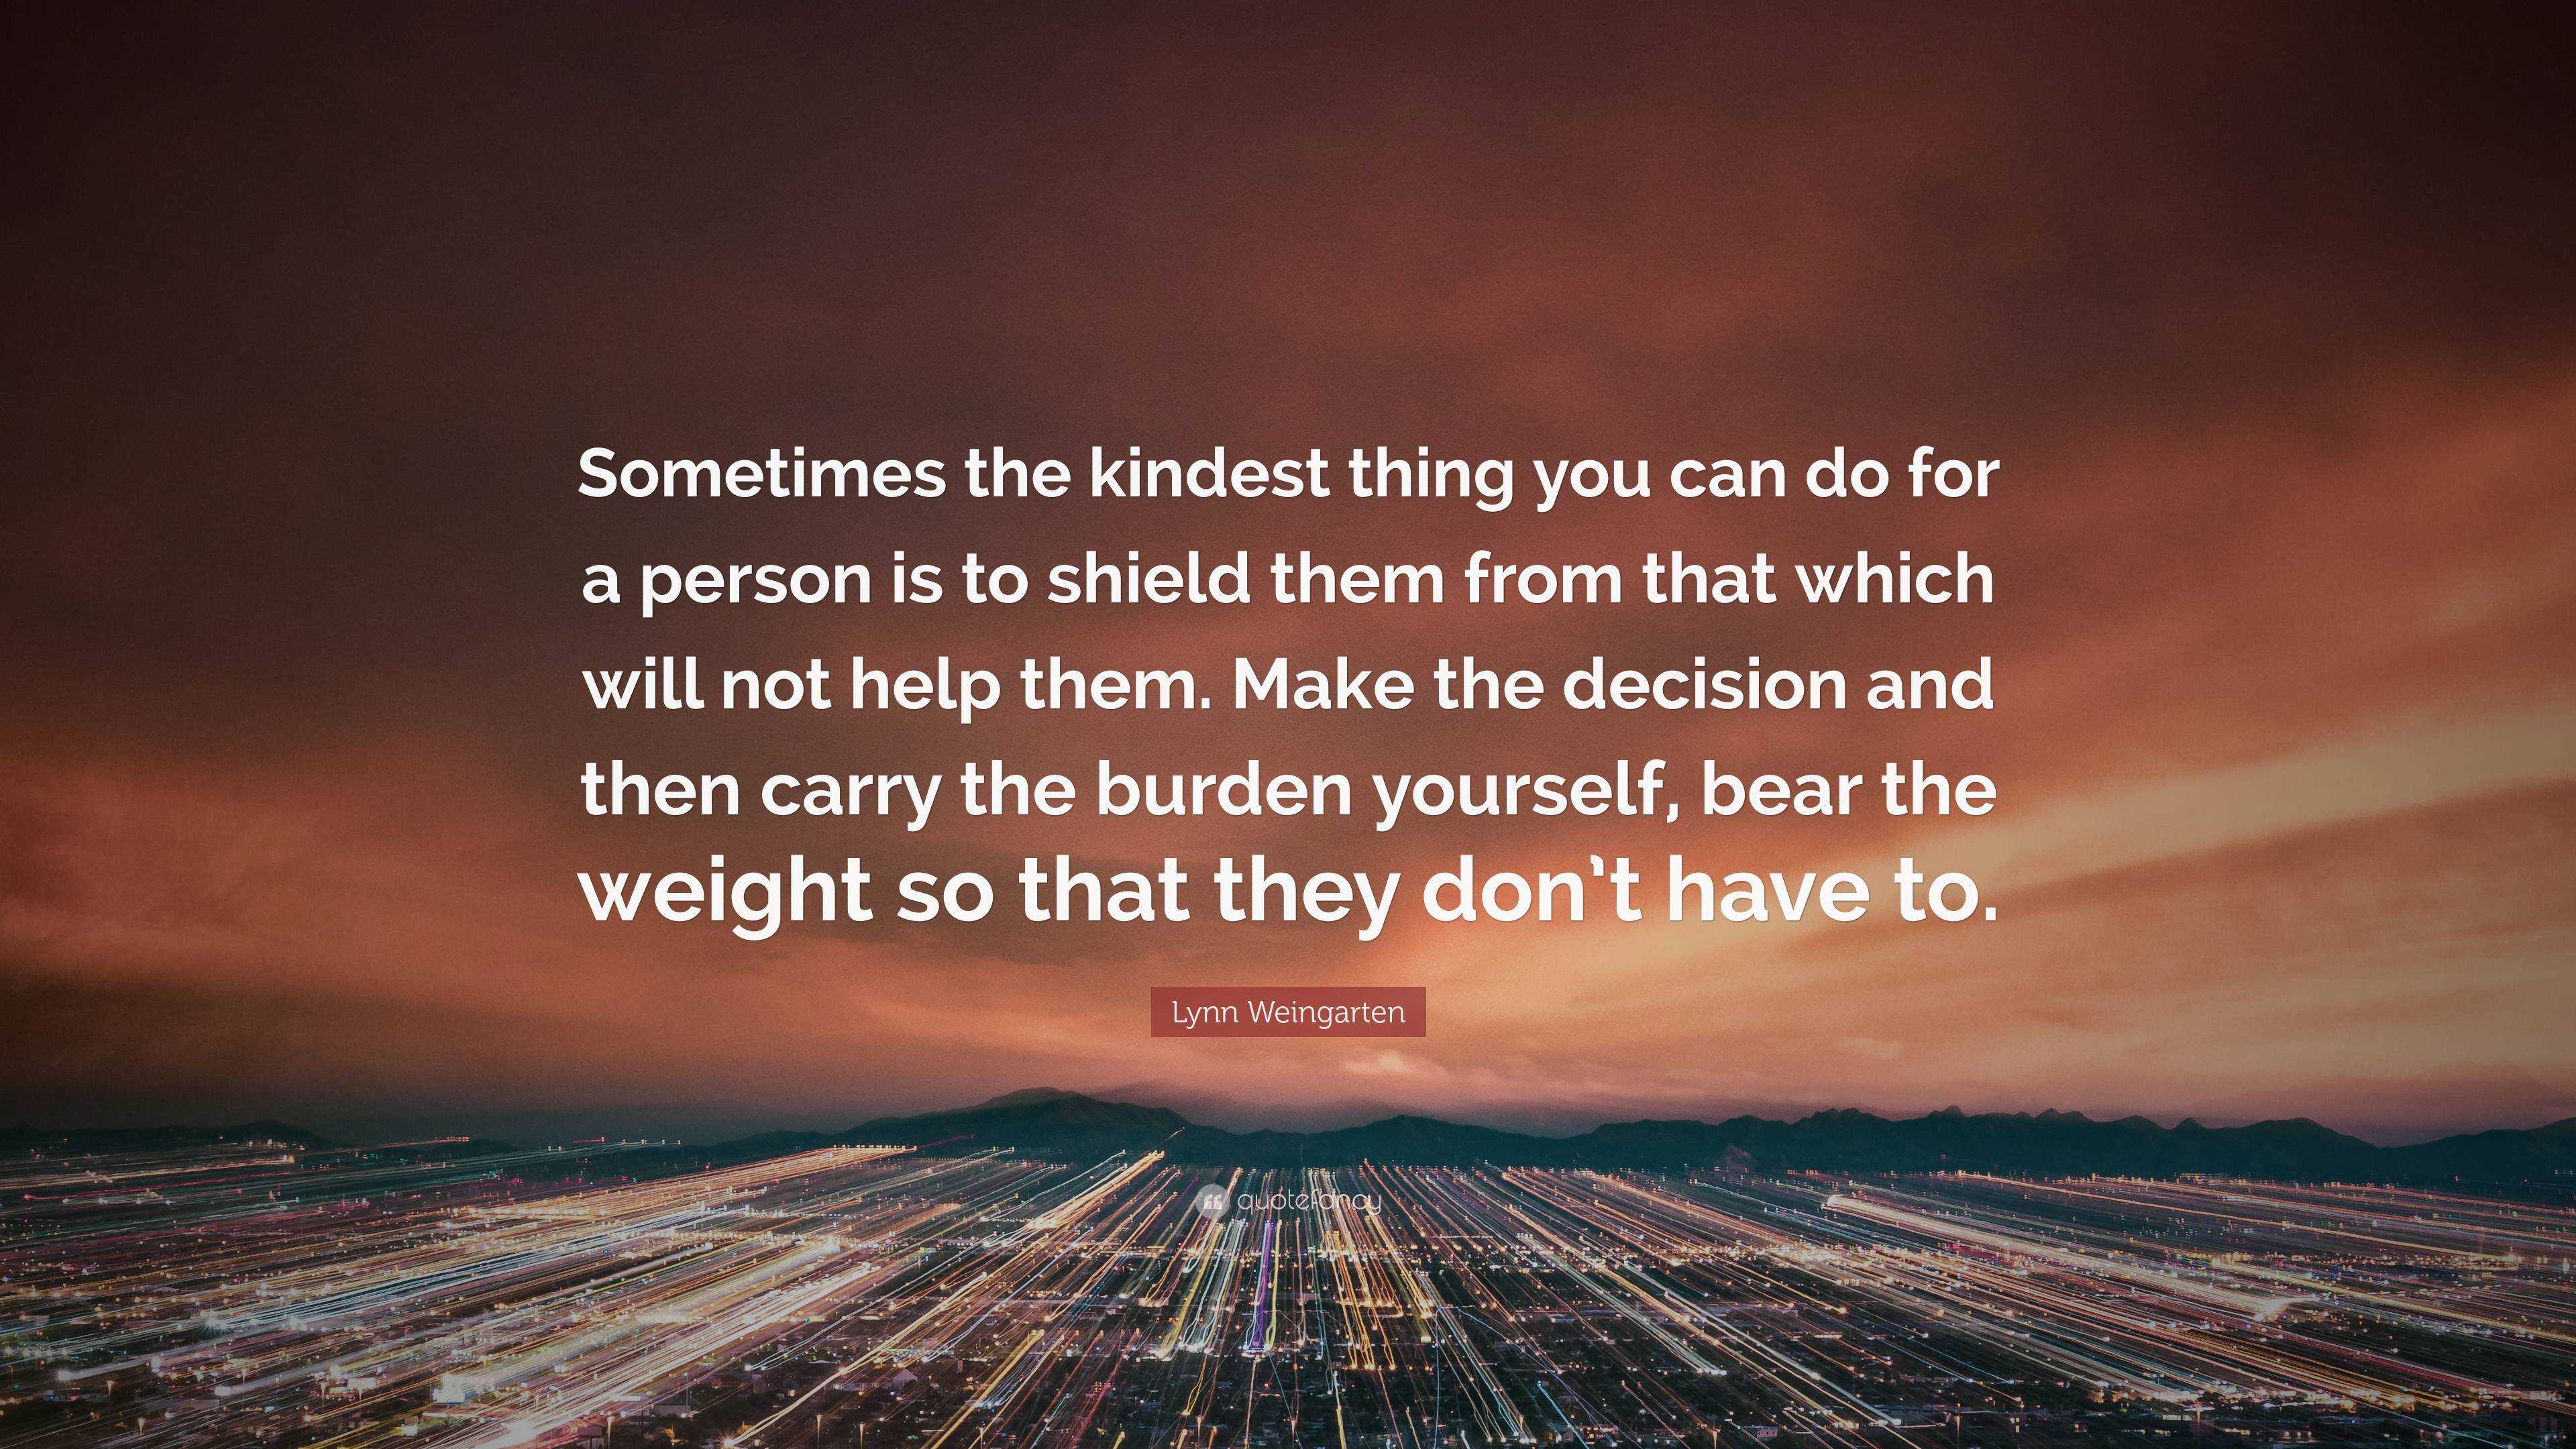 Lynn Weingarten Quote: “Sometimes the kindest thing you can do for